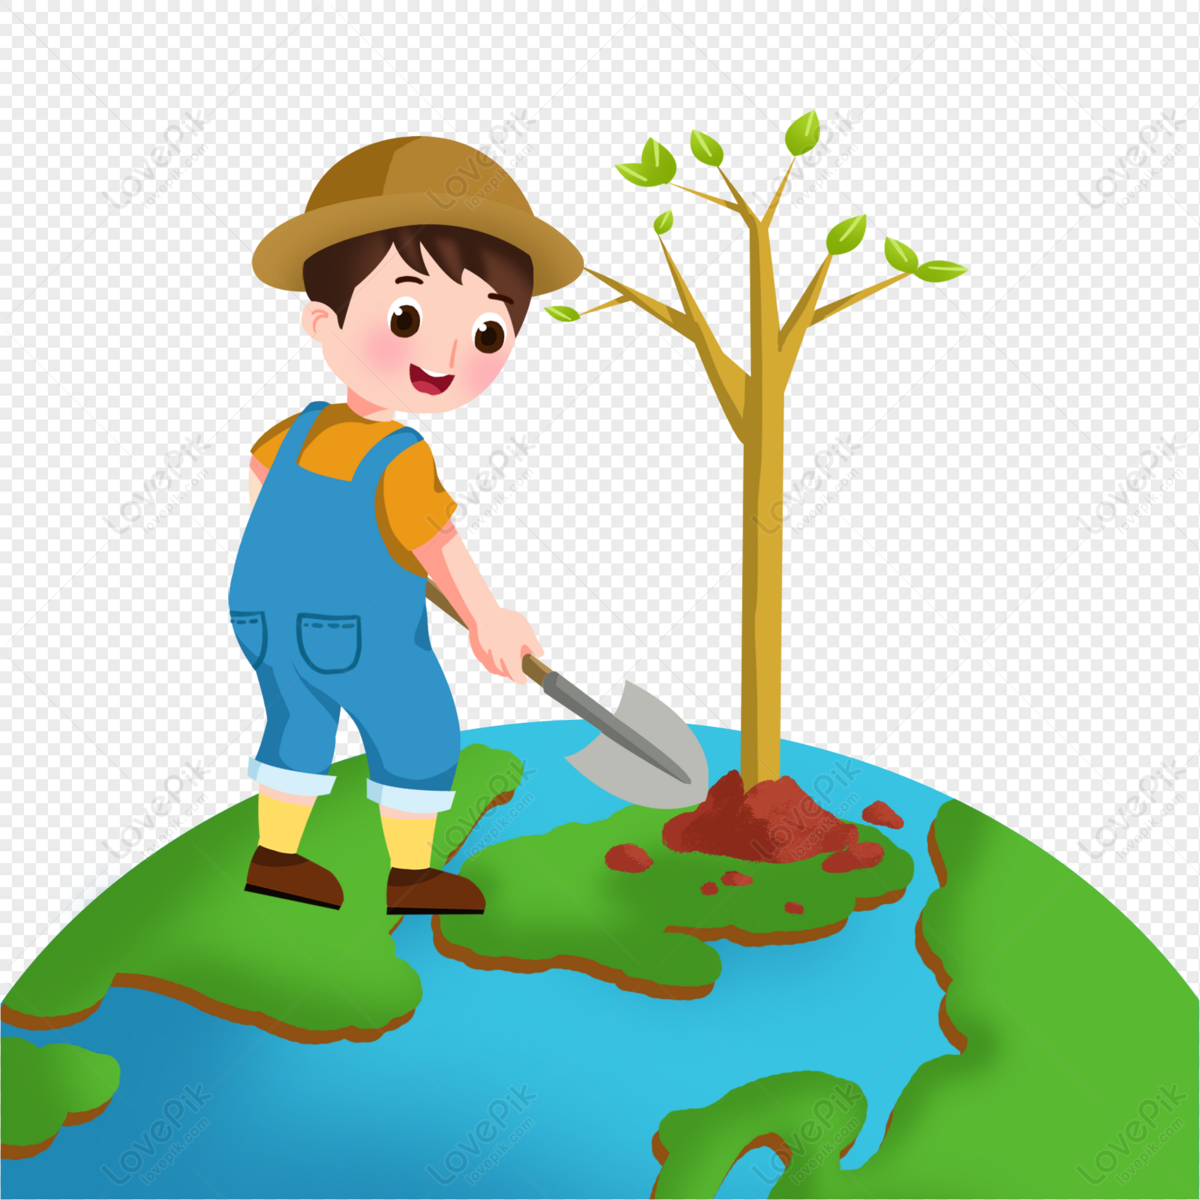 Cartoon Boy Planting Tree Illustration PNG Hd Transparent Image And Clipart  Image For Free Download - Lovepik | 401402064